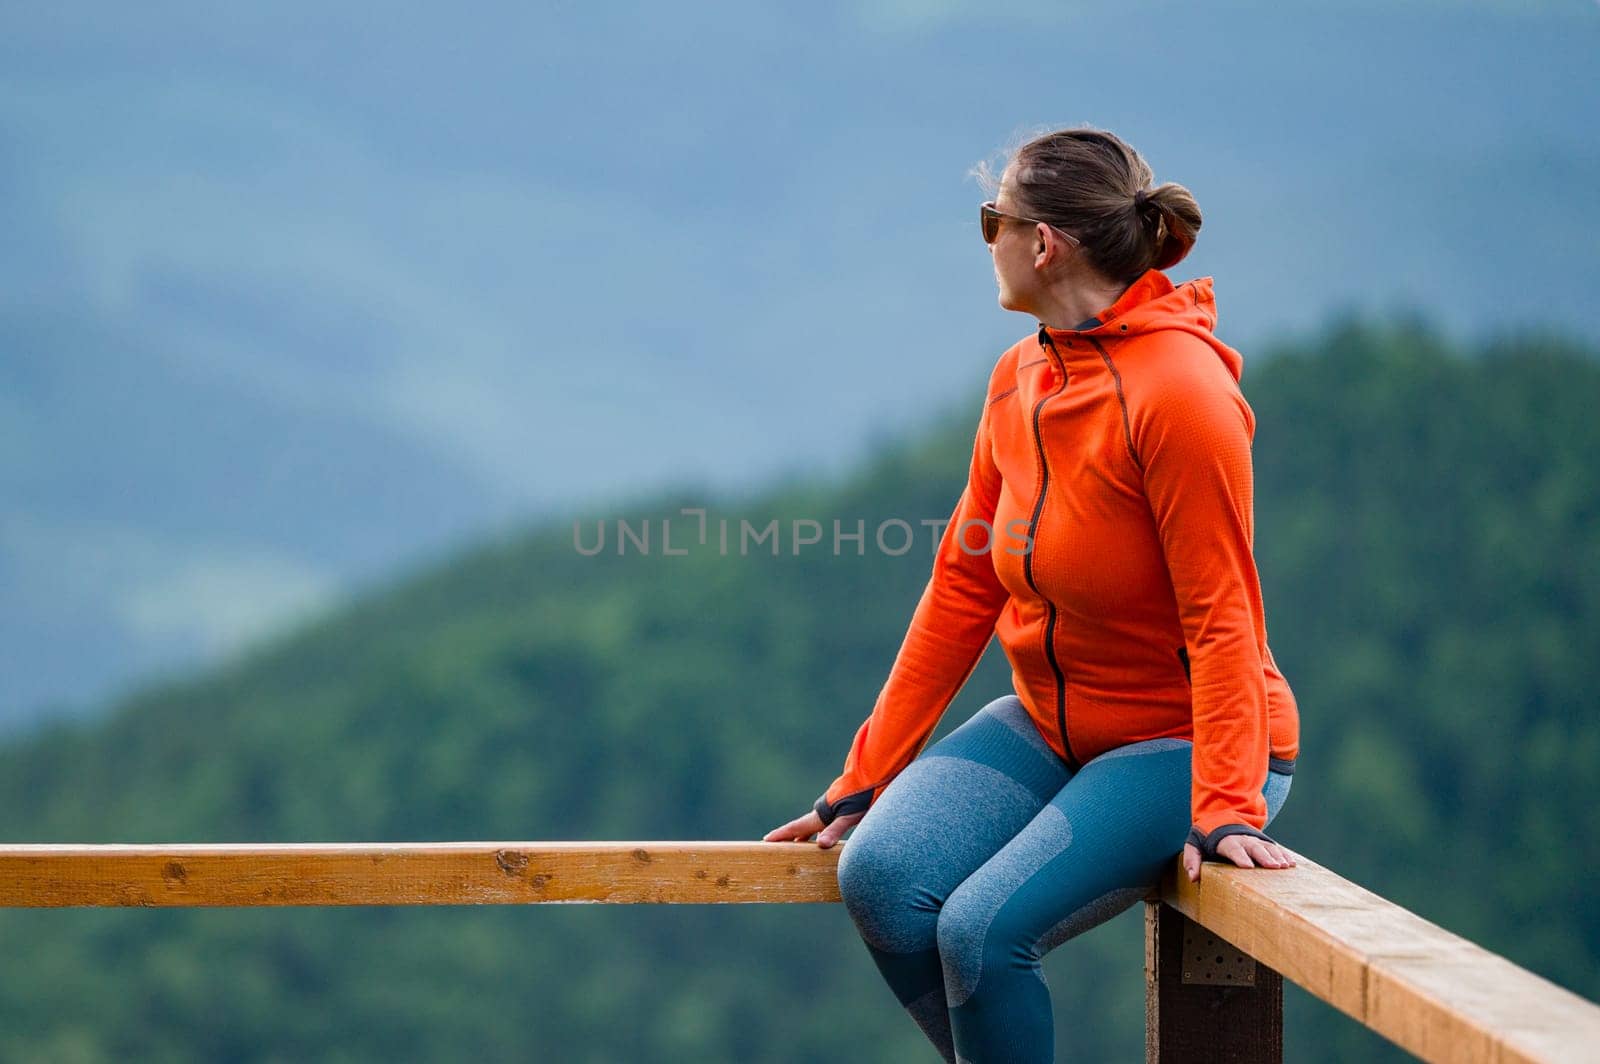 a young girl sits on a wooden handrail, against the background of mountains and evergreen forest.